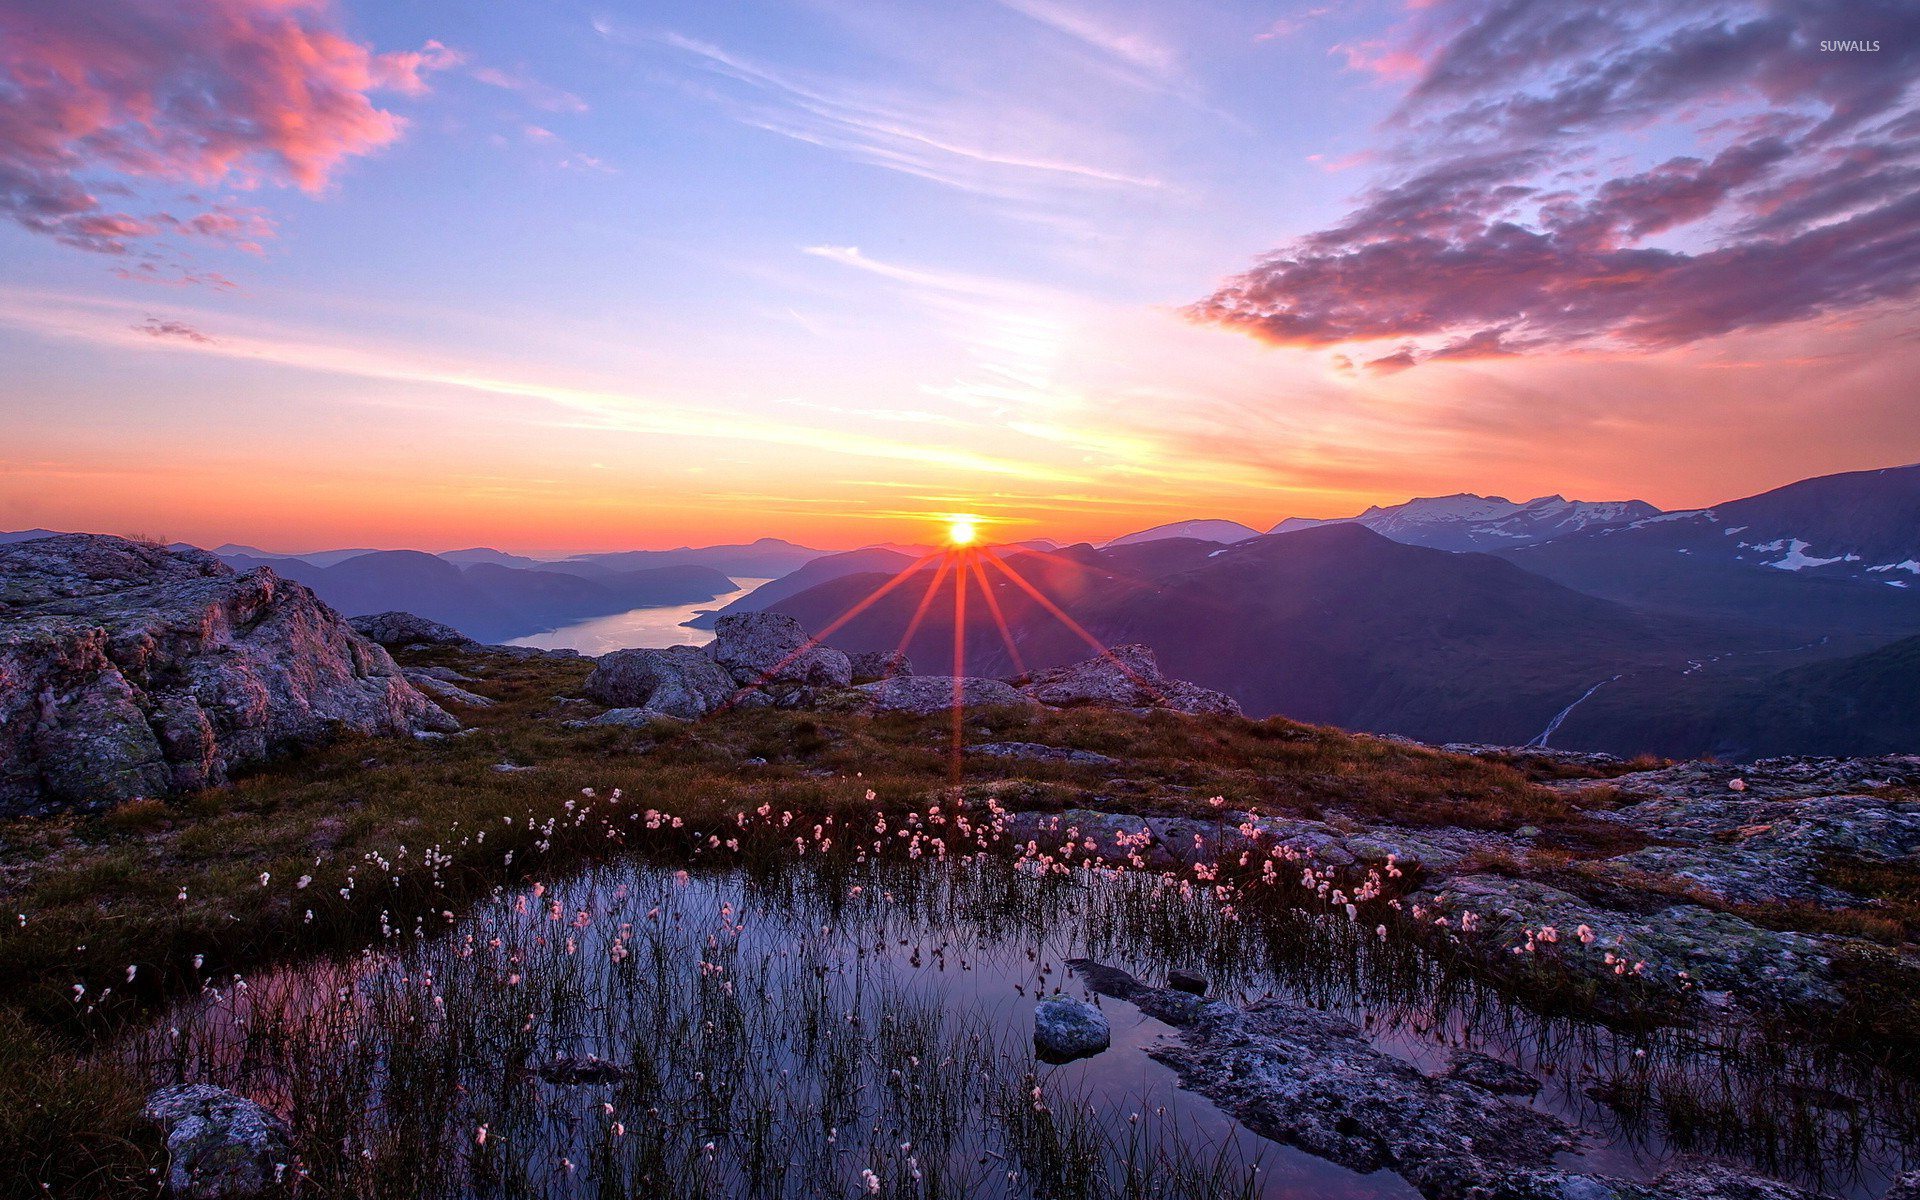 Sunrise over the mountains [3] wallpaper - Nature wallpapers - #17063